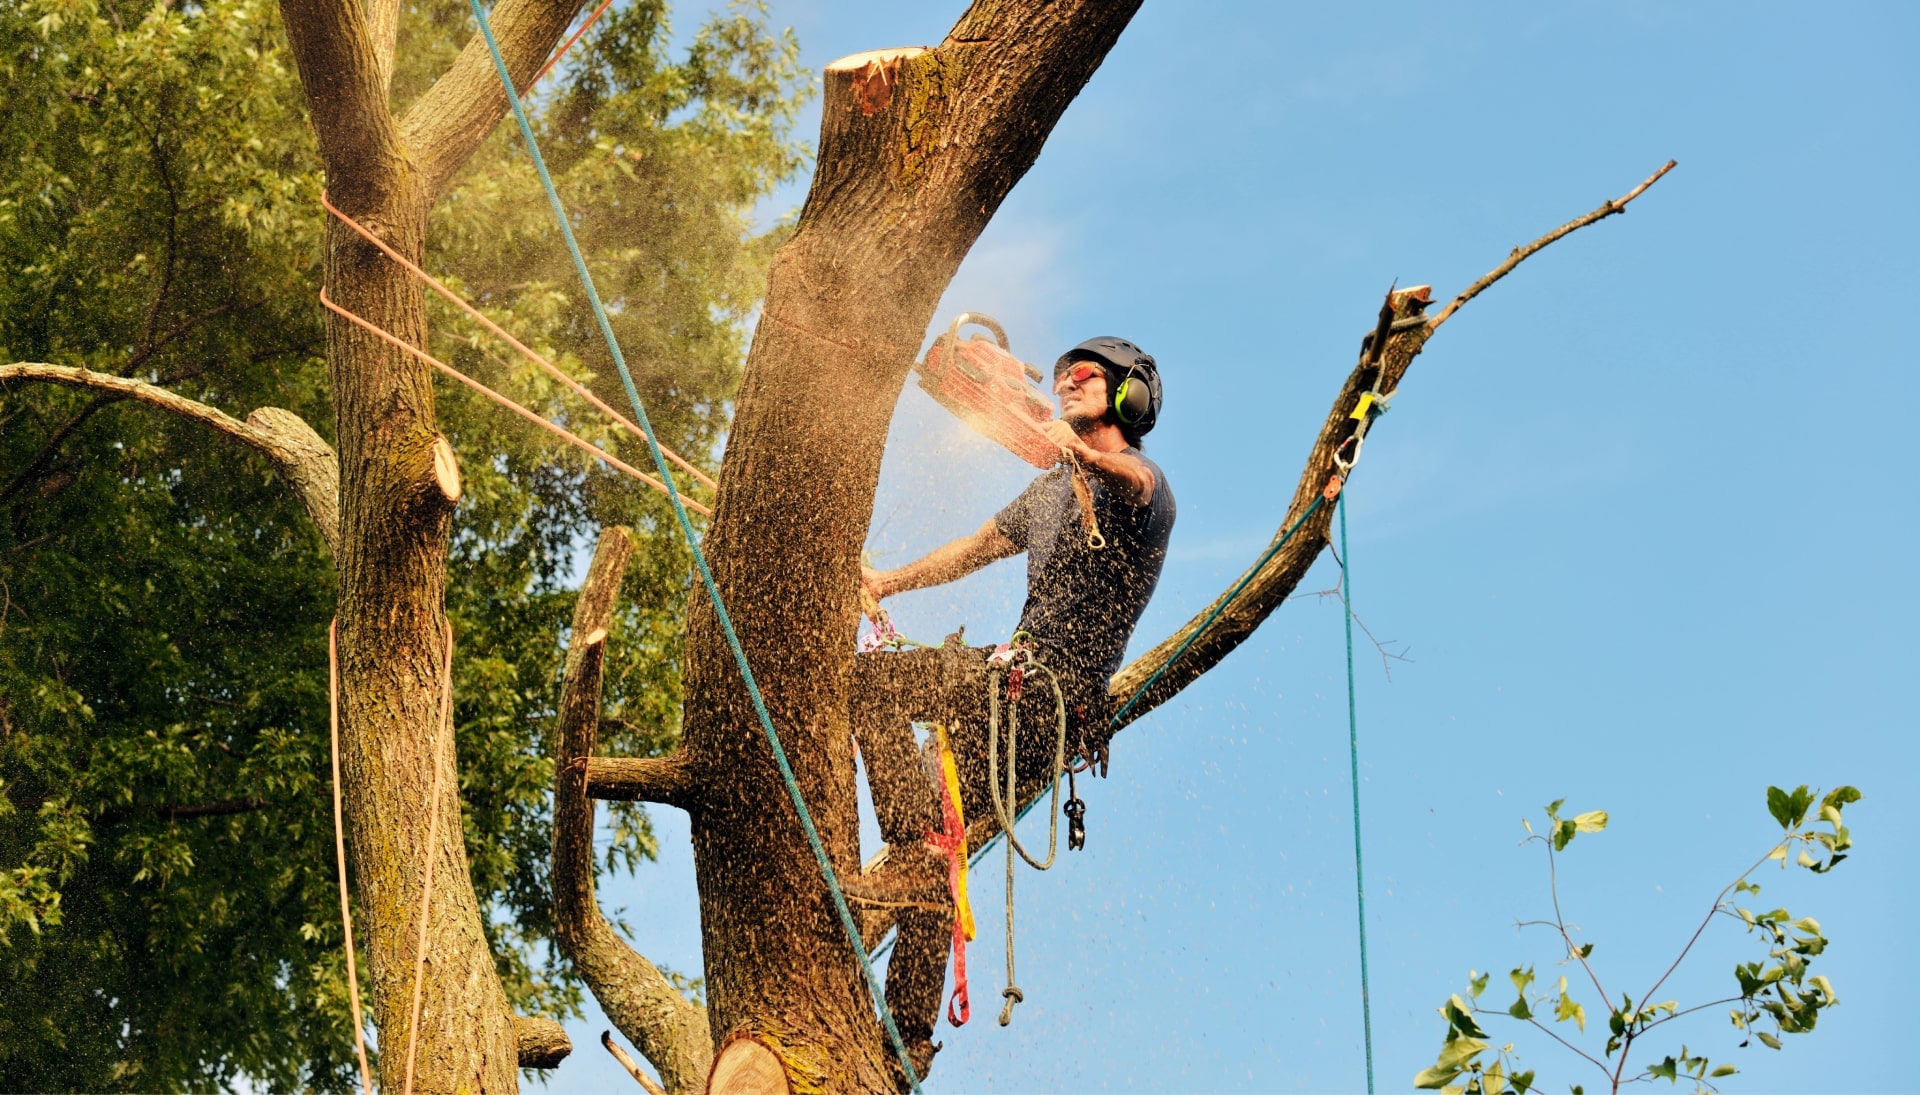 Raleigh tree removal experts solve tree issues.